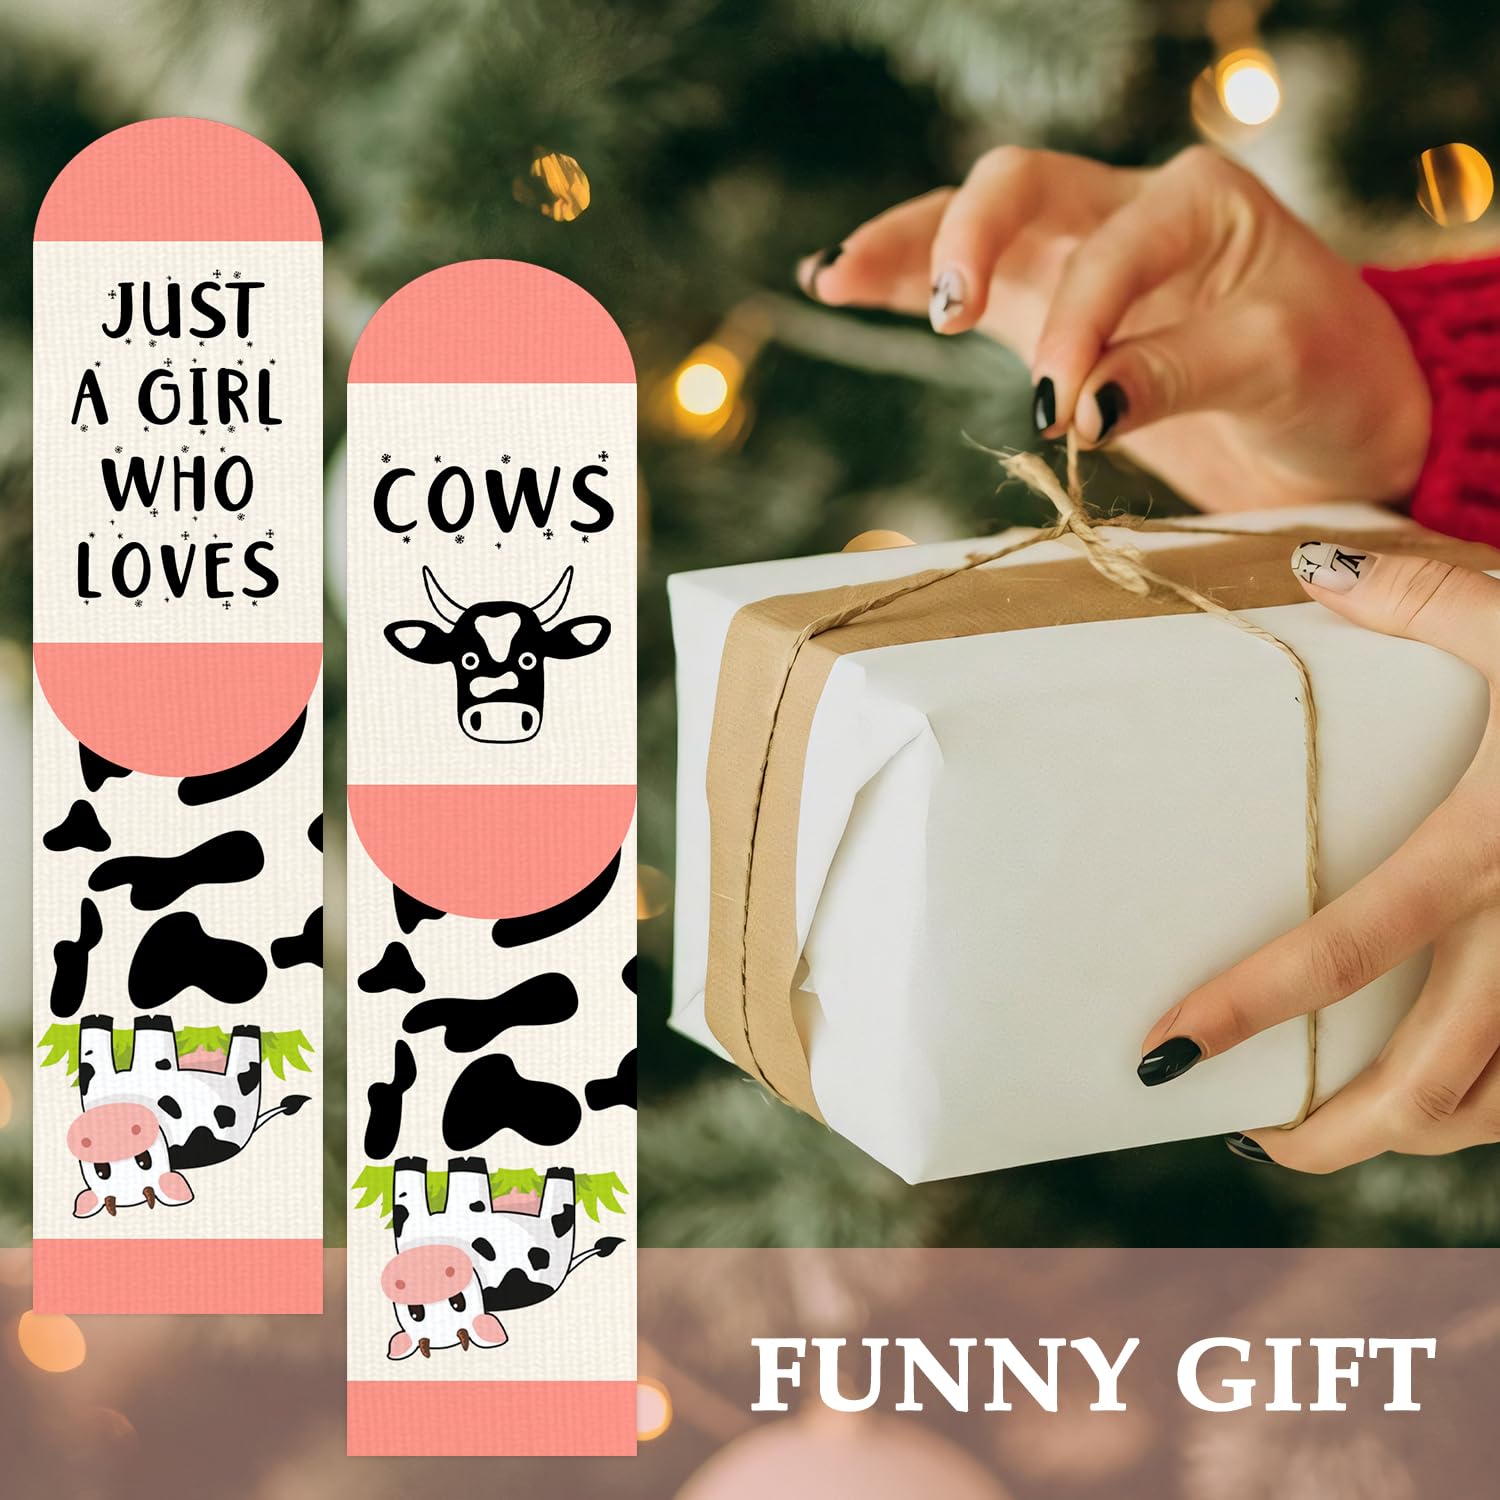 Funny Animals Socks for Women Ladies Mum Teenage Girls - Just A Girl Who Loves Cows - Novelty Funky Crazy Silly Cute Cartoon Sock Mothers Day Easter Valentine Christmas Birthday Gifts Stocking Fillers